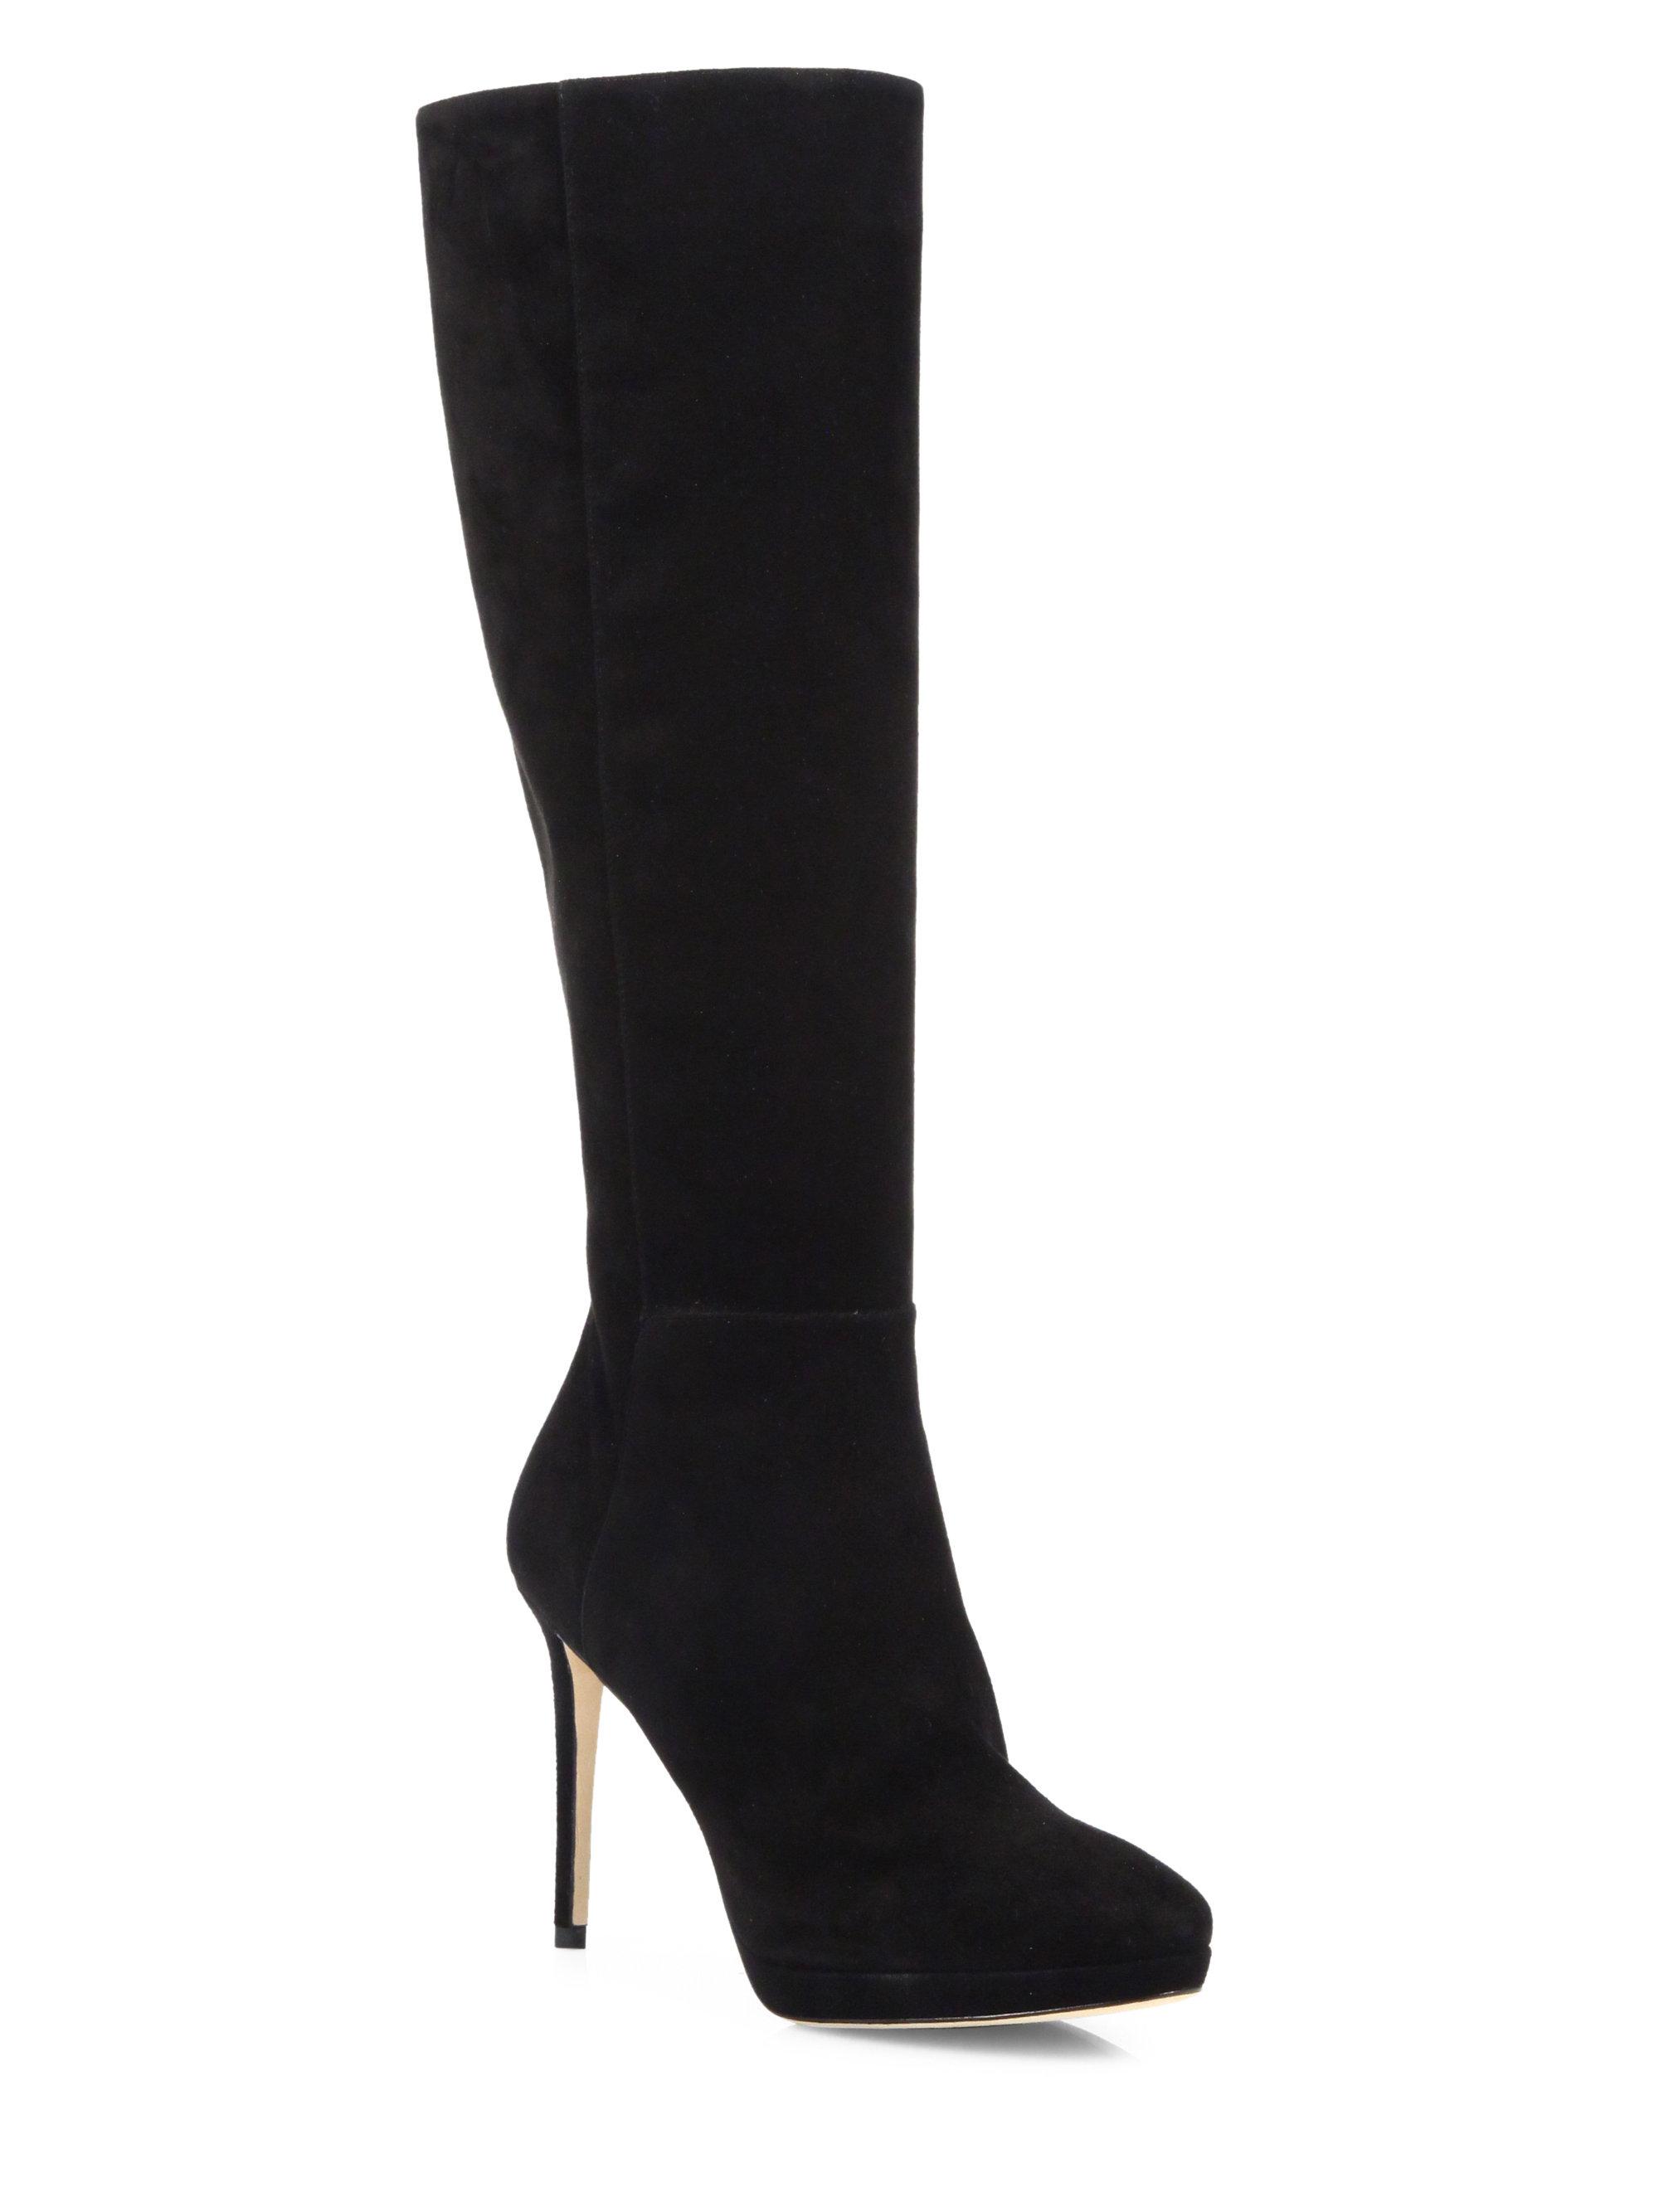 Jimmy Choo Hoxton 100 Tall Suede Boots in Black - Lyst